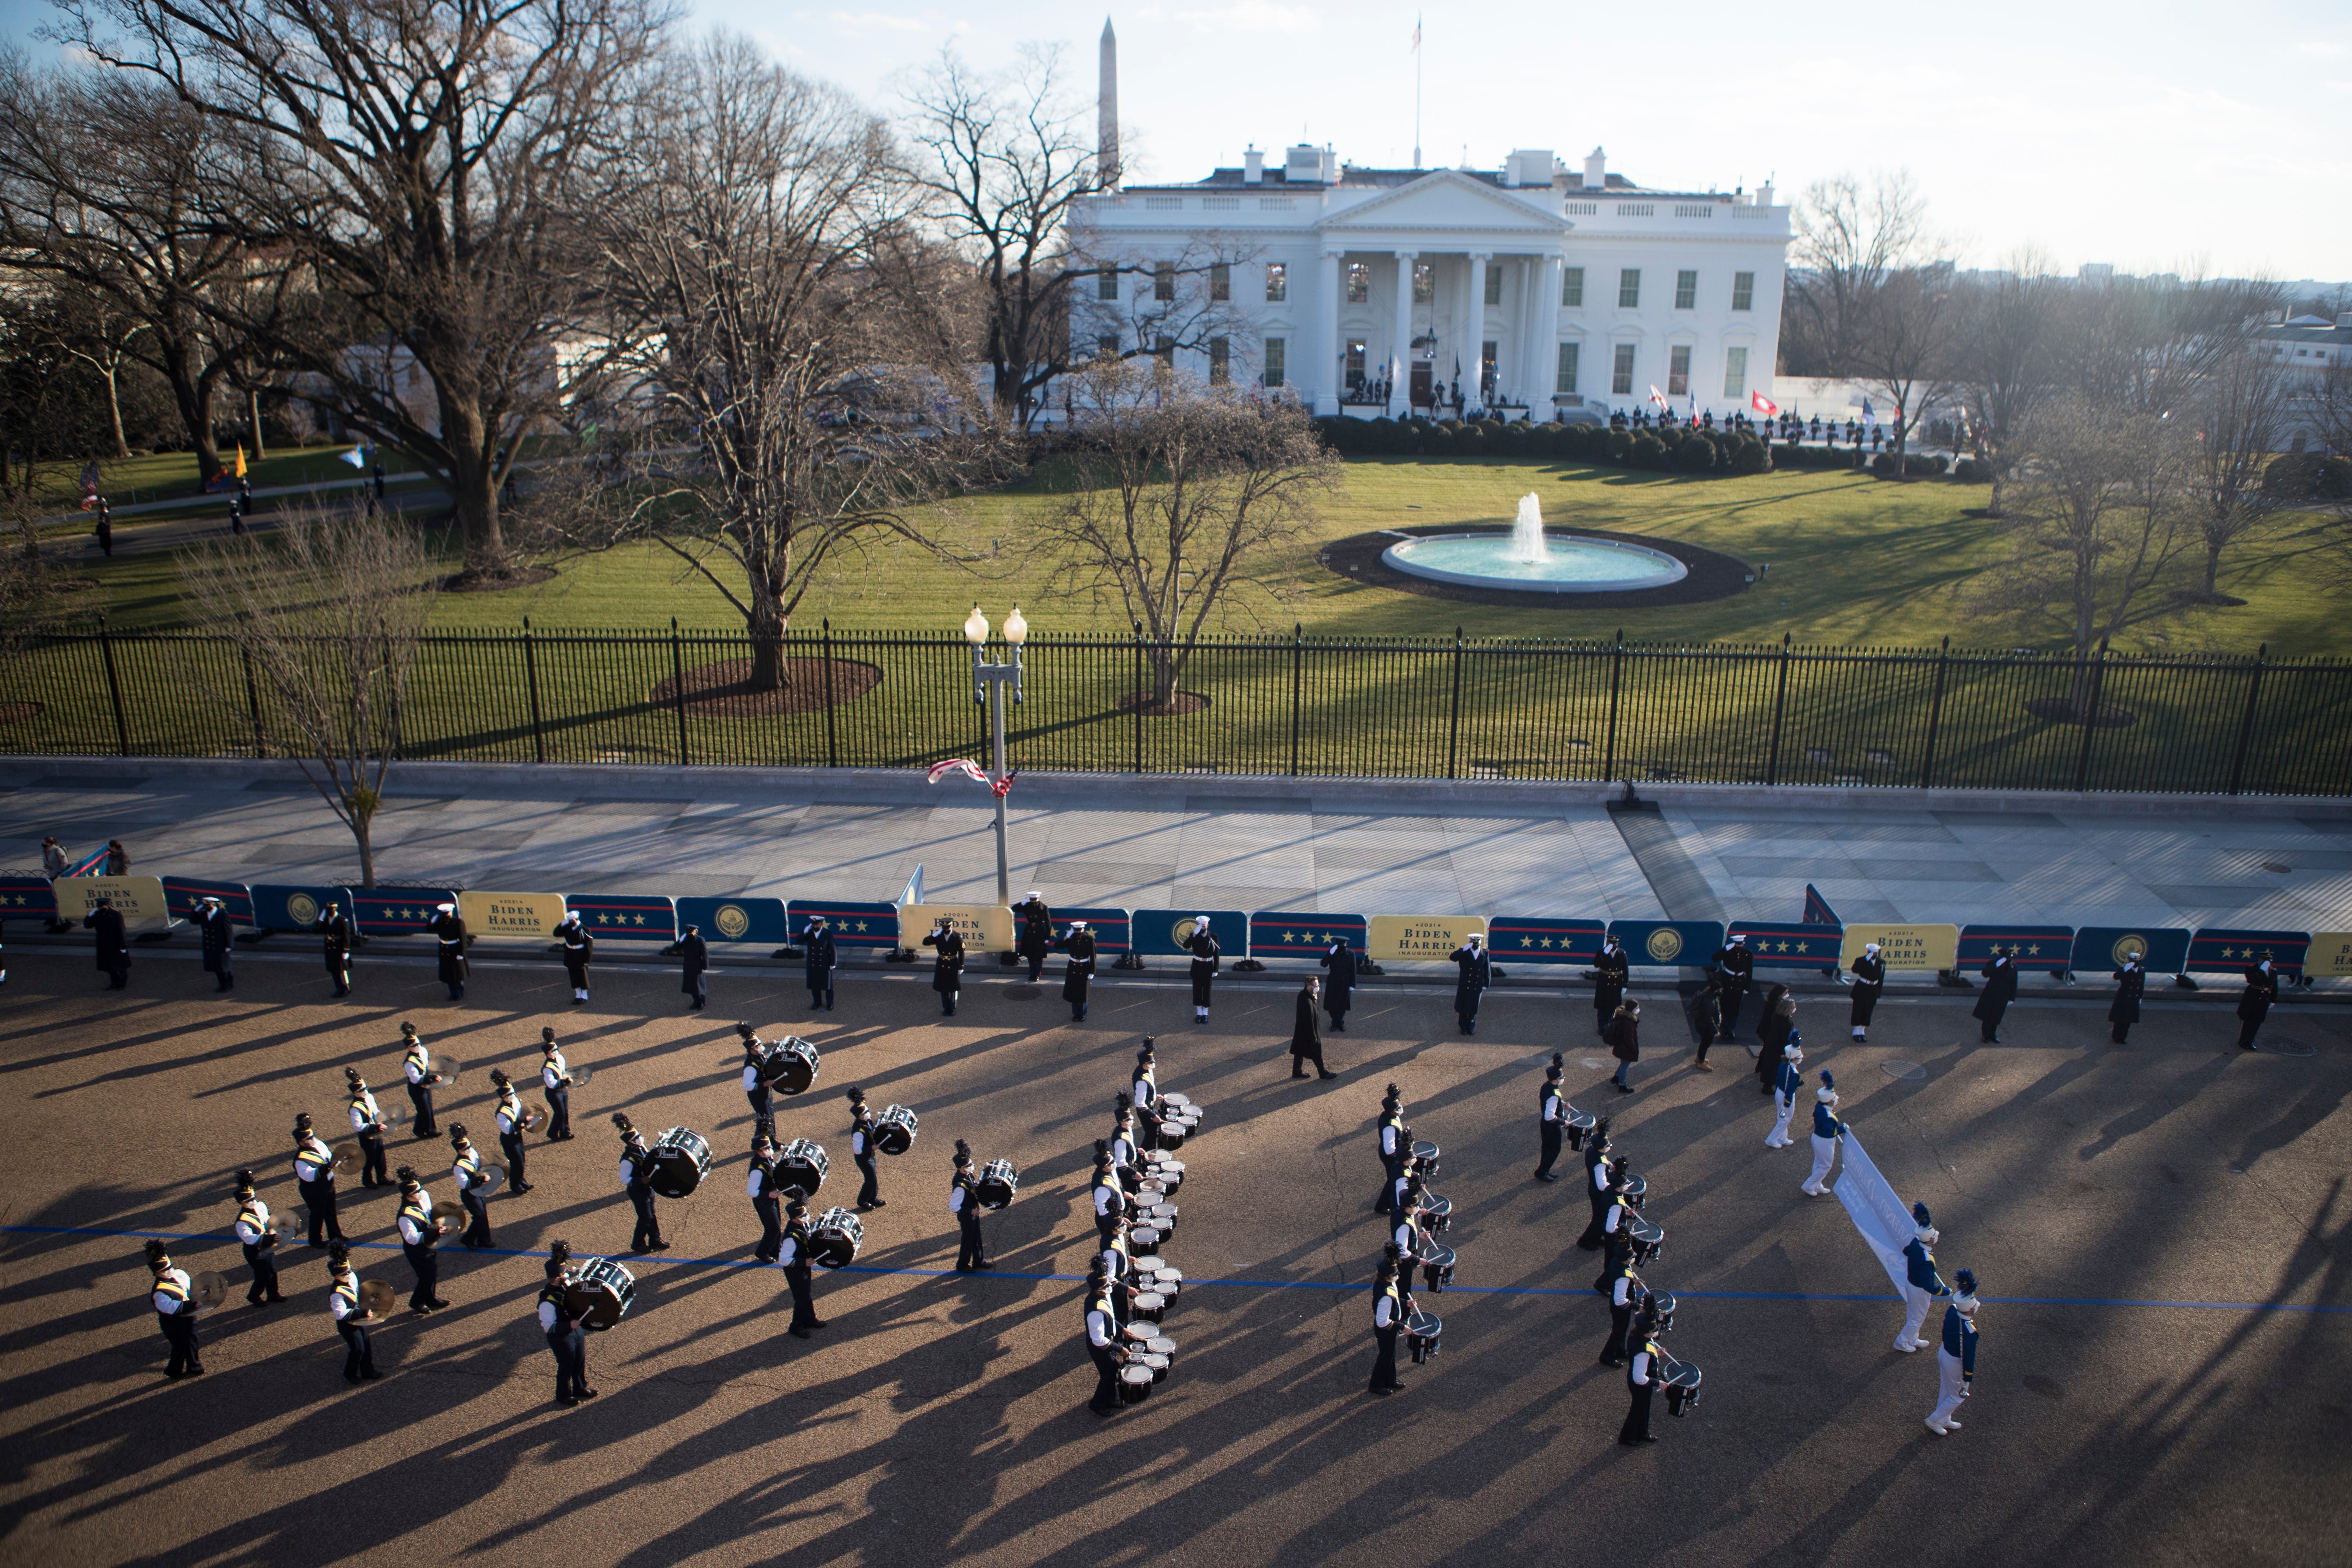 The University of Delaware Marching Band performs on Pennsylvania Avenue during the presidential escort of the 59th Inaugural Ceremonies in Washington on Jan 20, 2021.